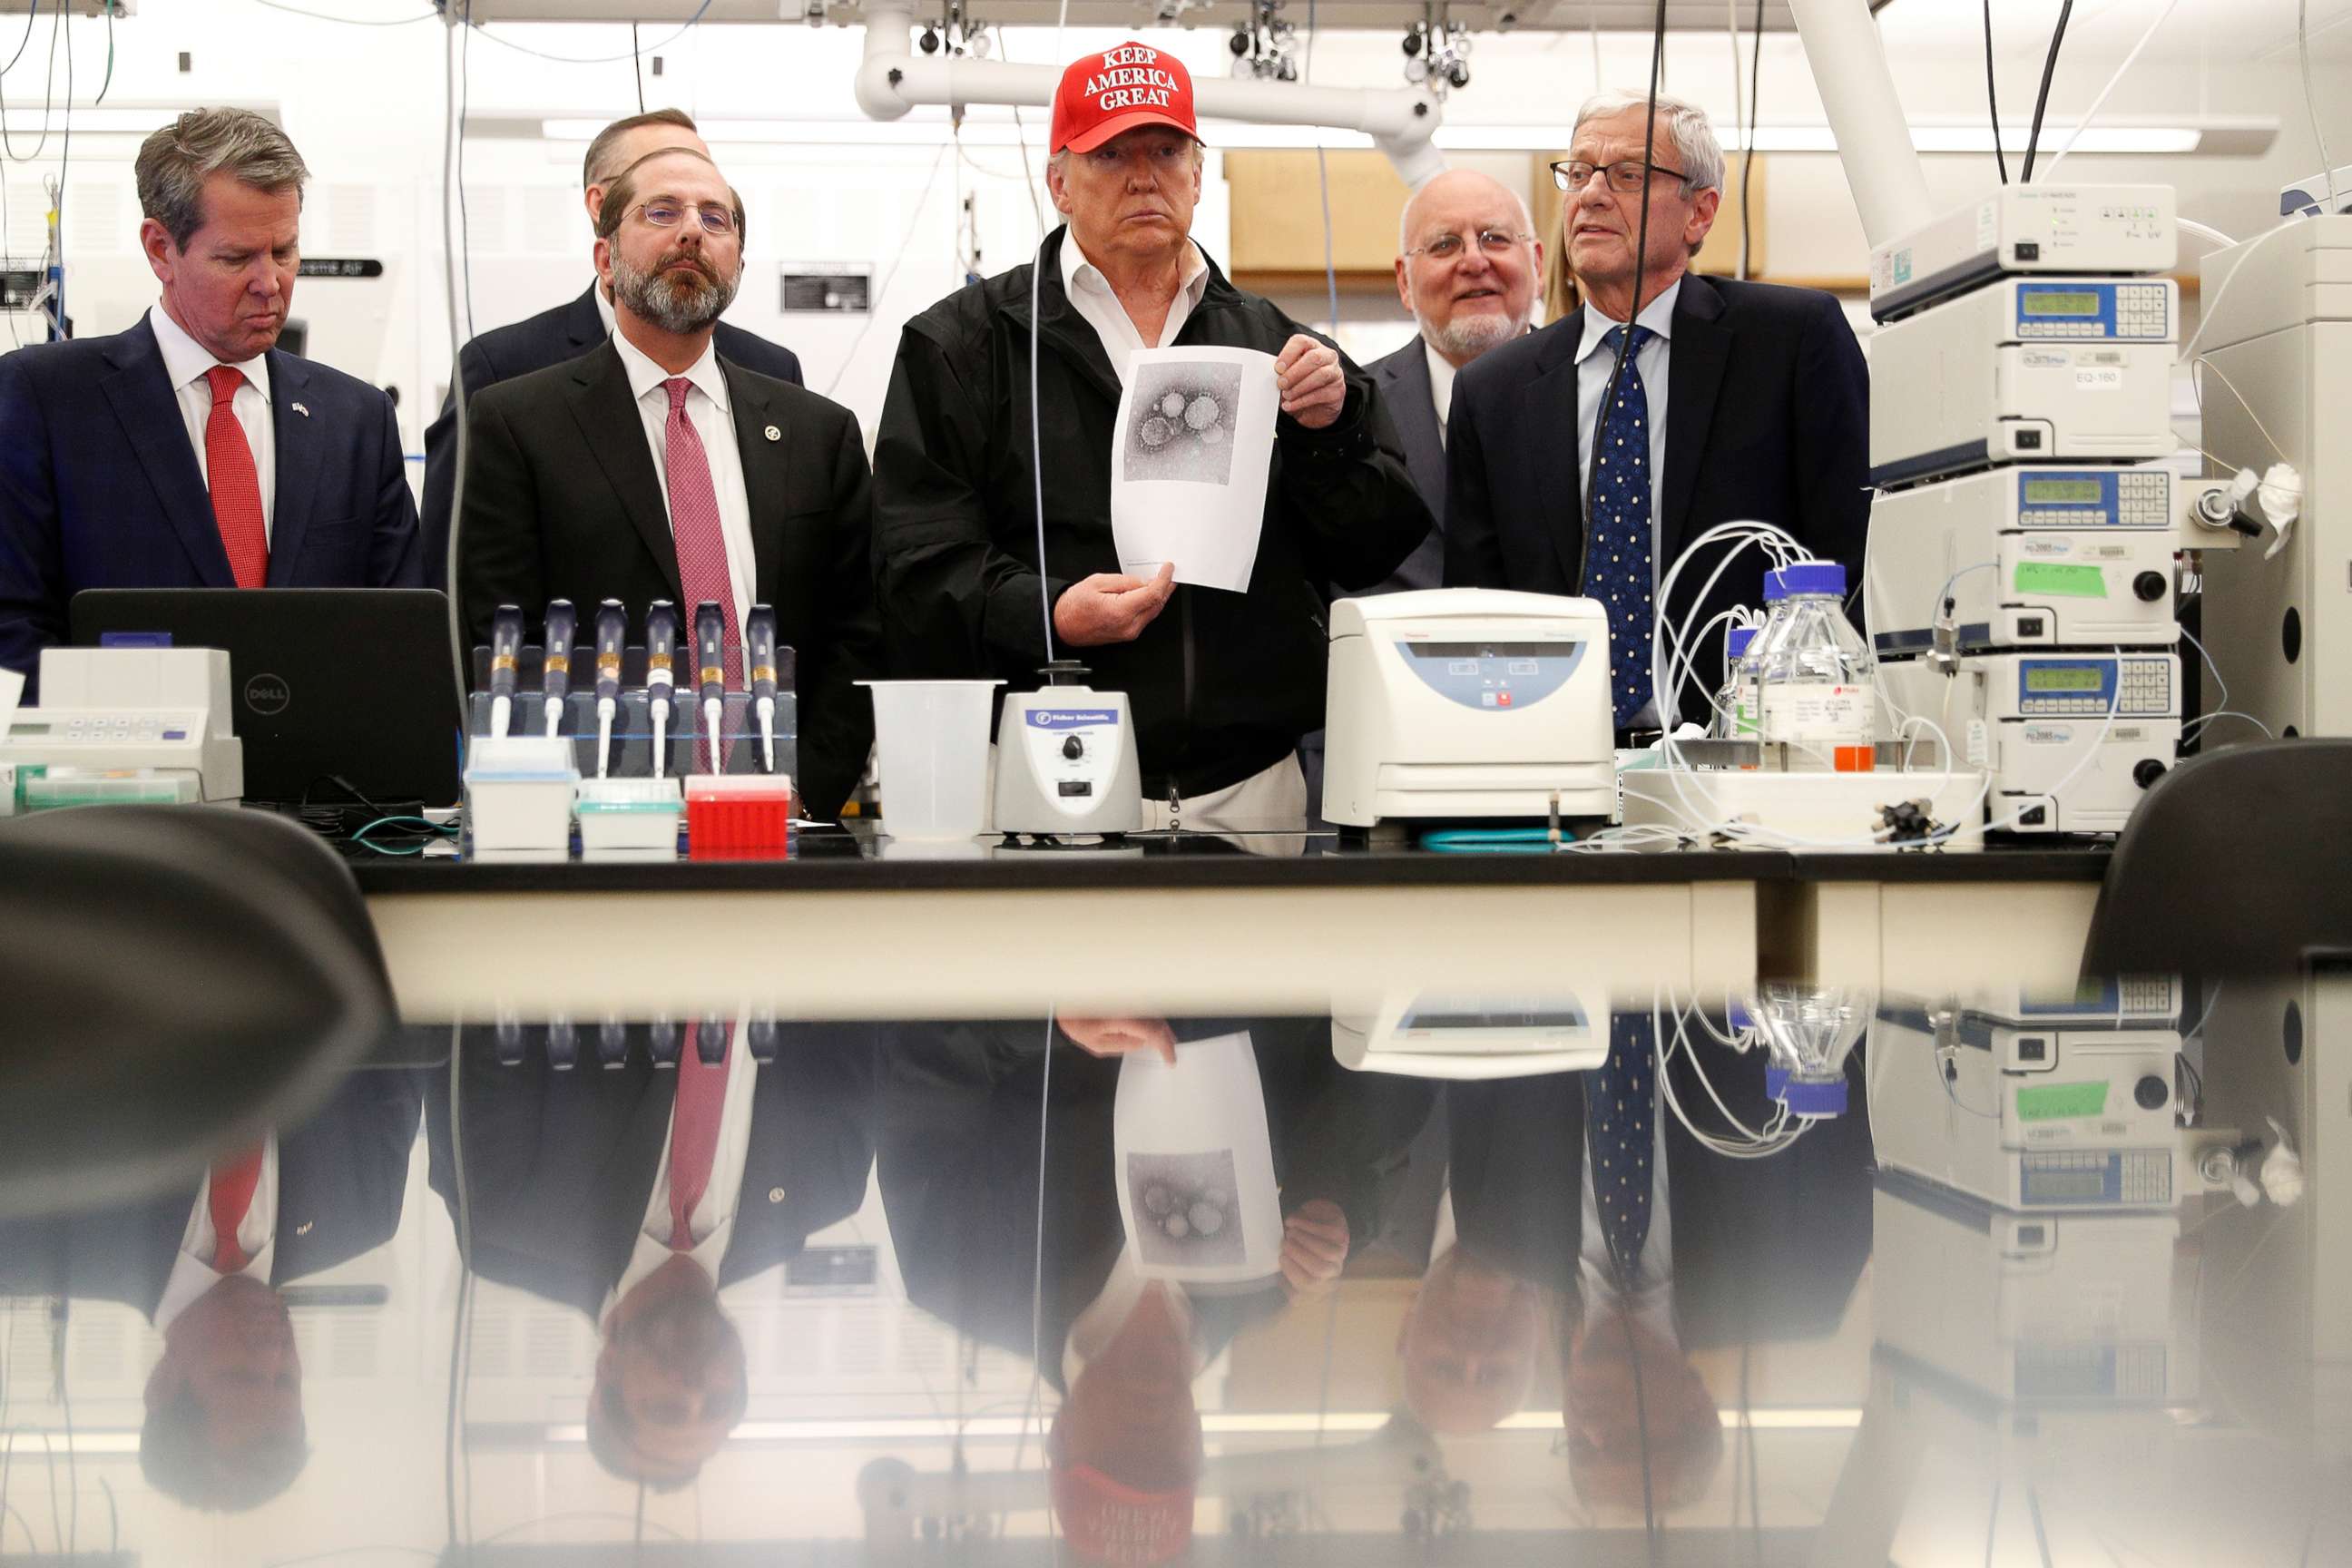 PHOTO: President Donald Trump displays a photo of the COVID-19 Coronavirus during a tour of the Center for Disease Control in Atlanta, March 6, 2020.